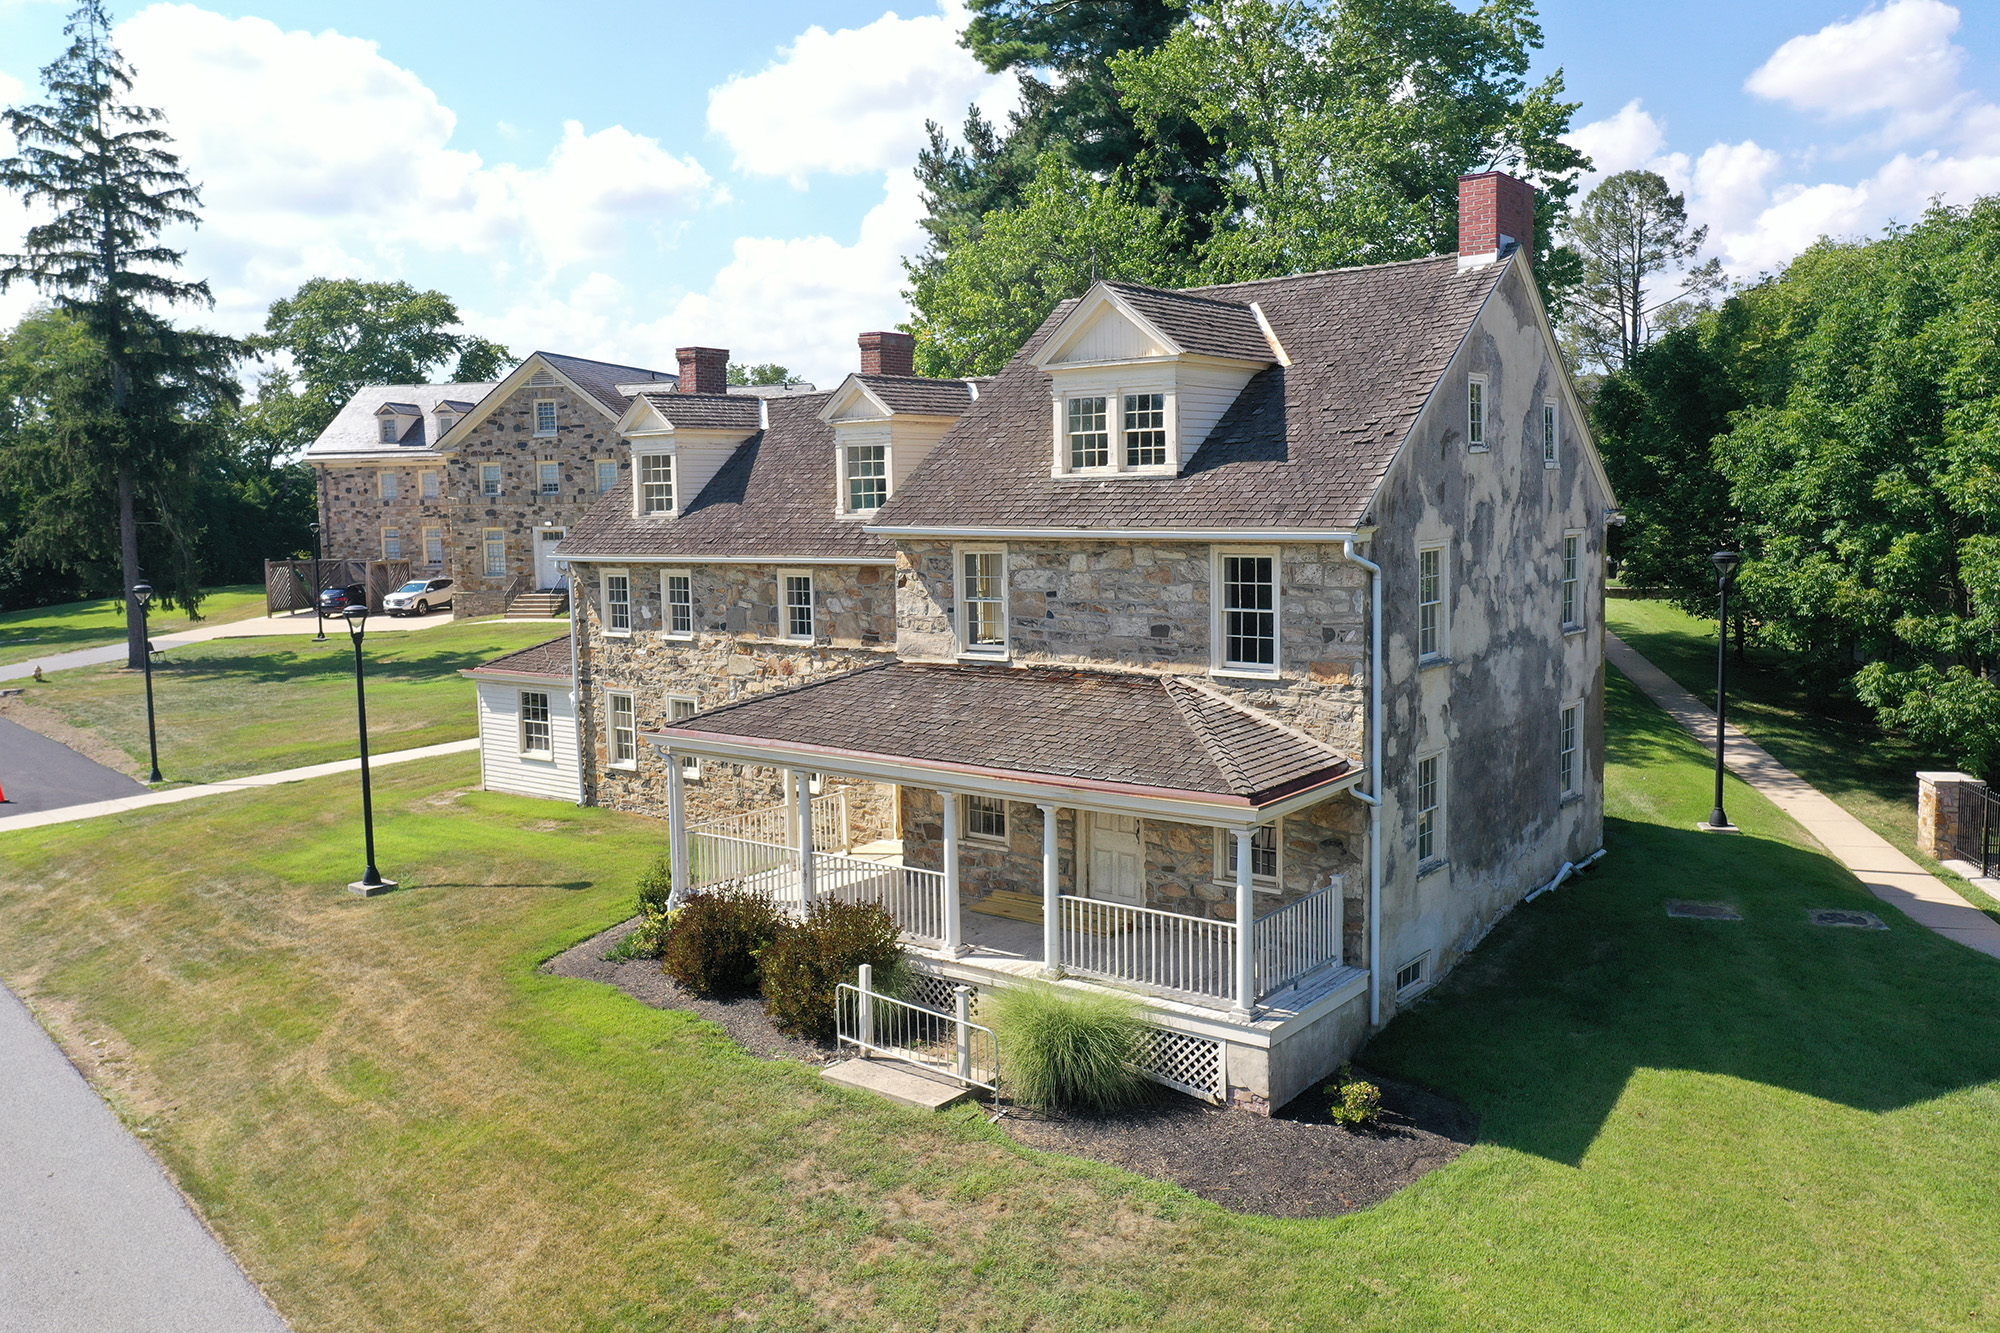 Cheyney University Advances Plans to Restore 240-Year-Old Campus Cottage, Convert to Welcome Center